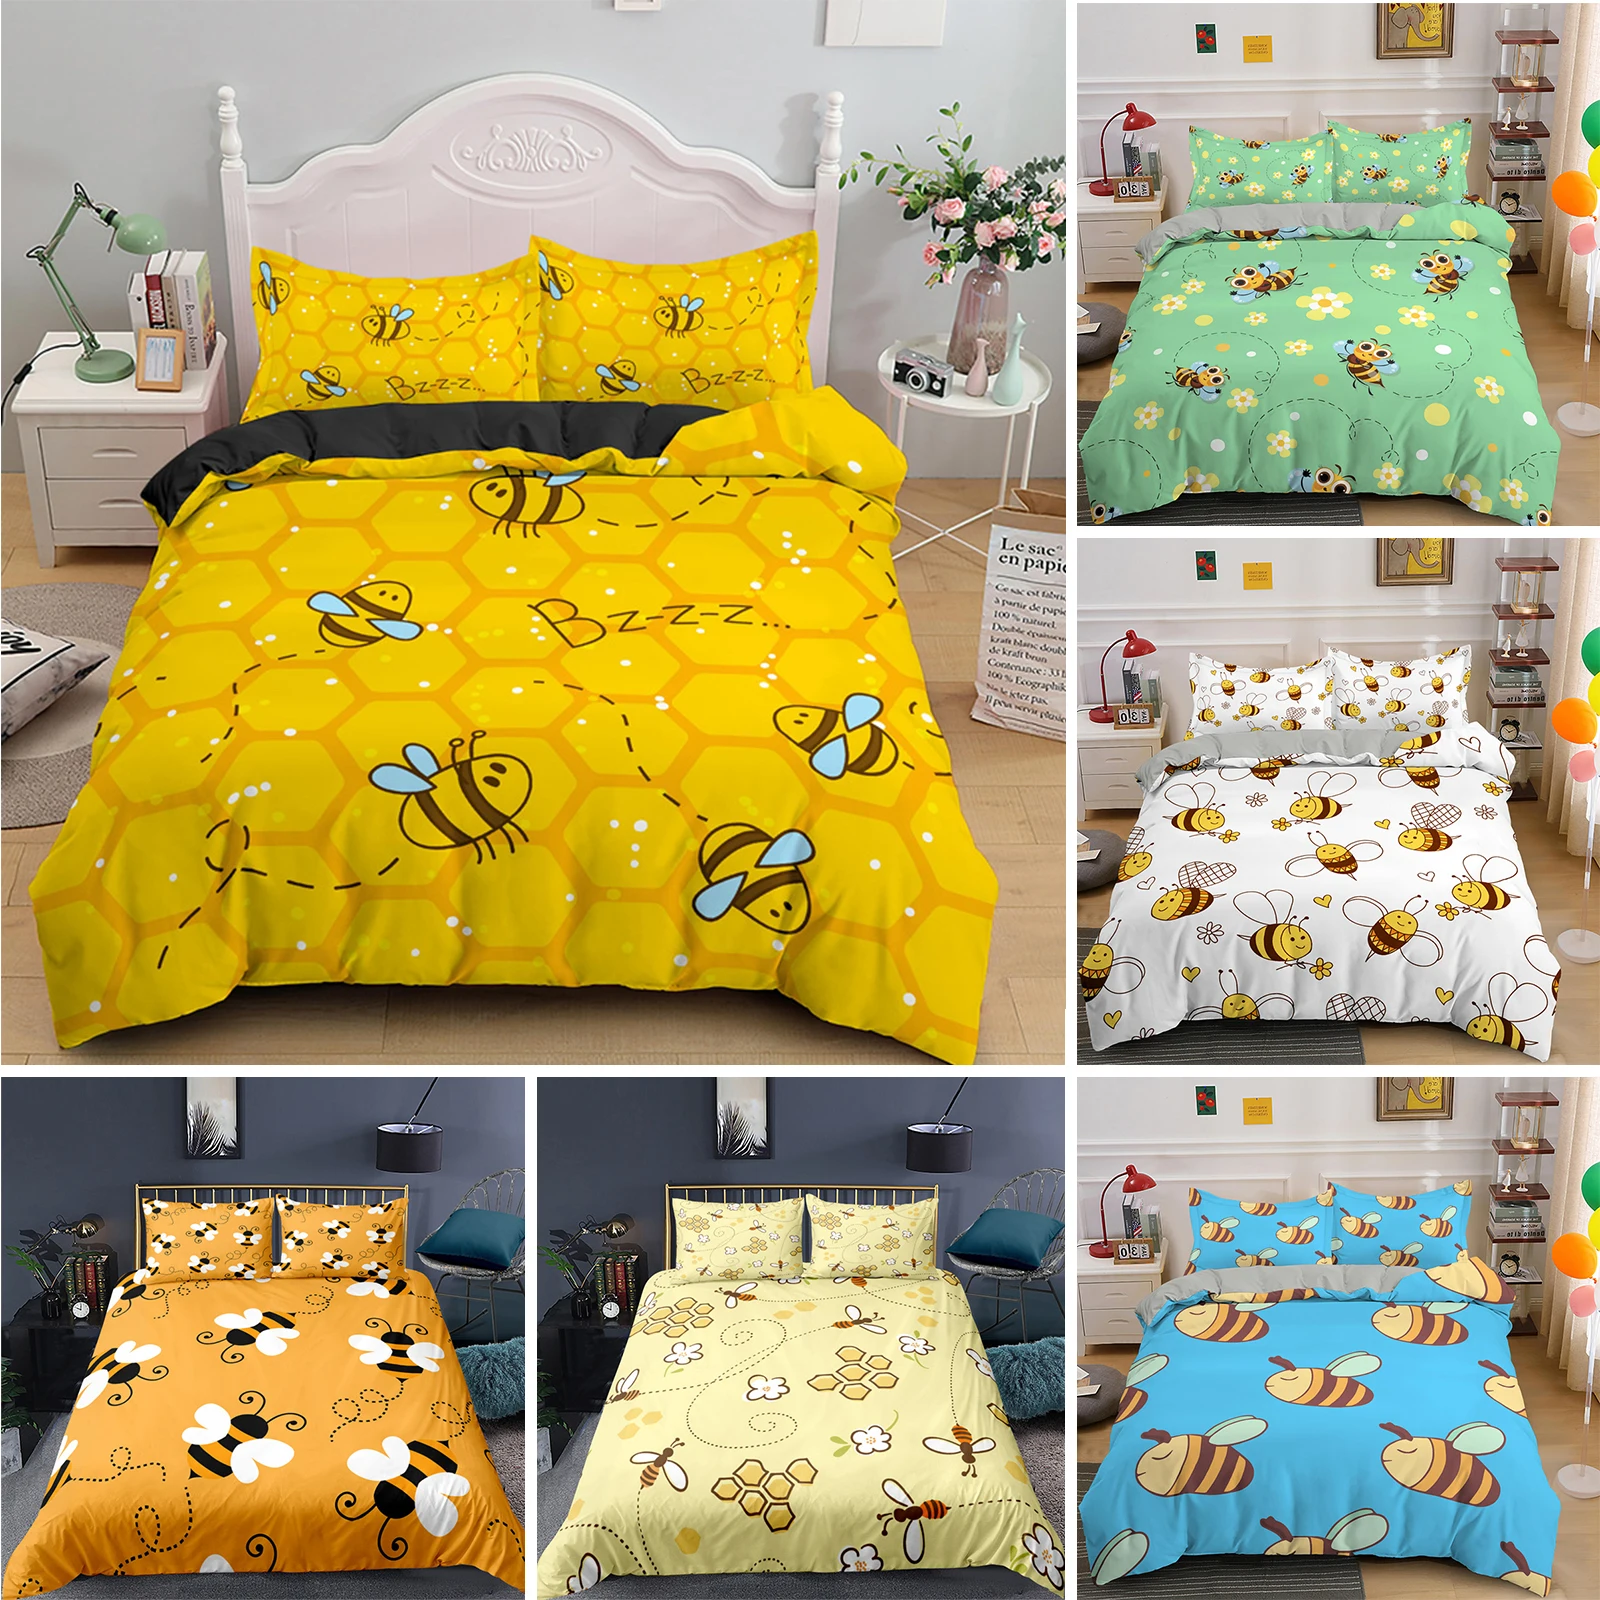 

Bee Honeycomb Bedding Set Flying Wildlife Geometric Floral Duvet Cover Twin King Size Microfiber Hexagon Beehive Comforter Cover